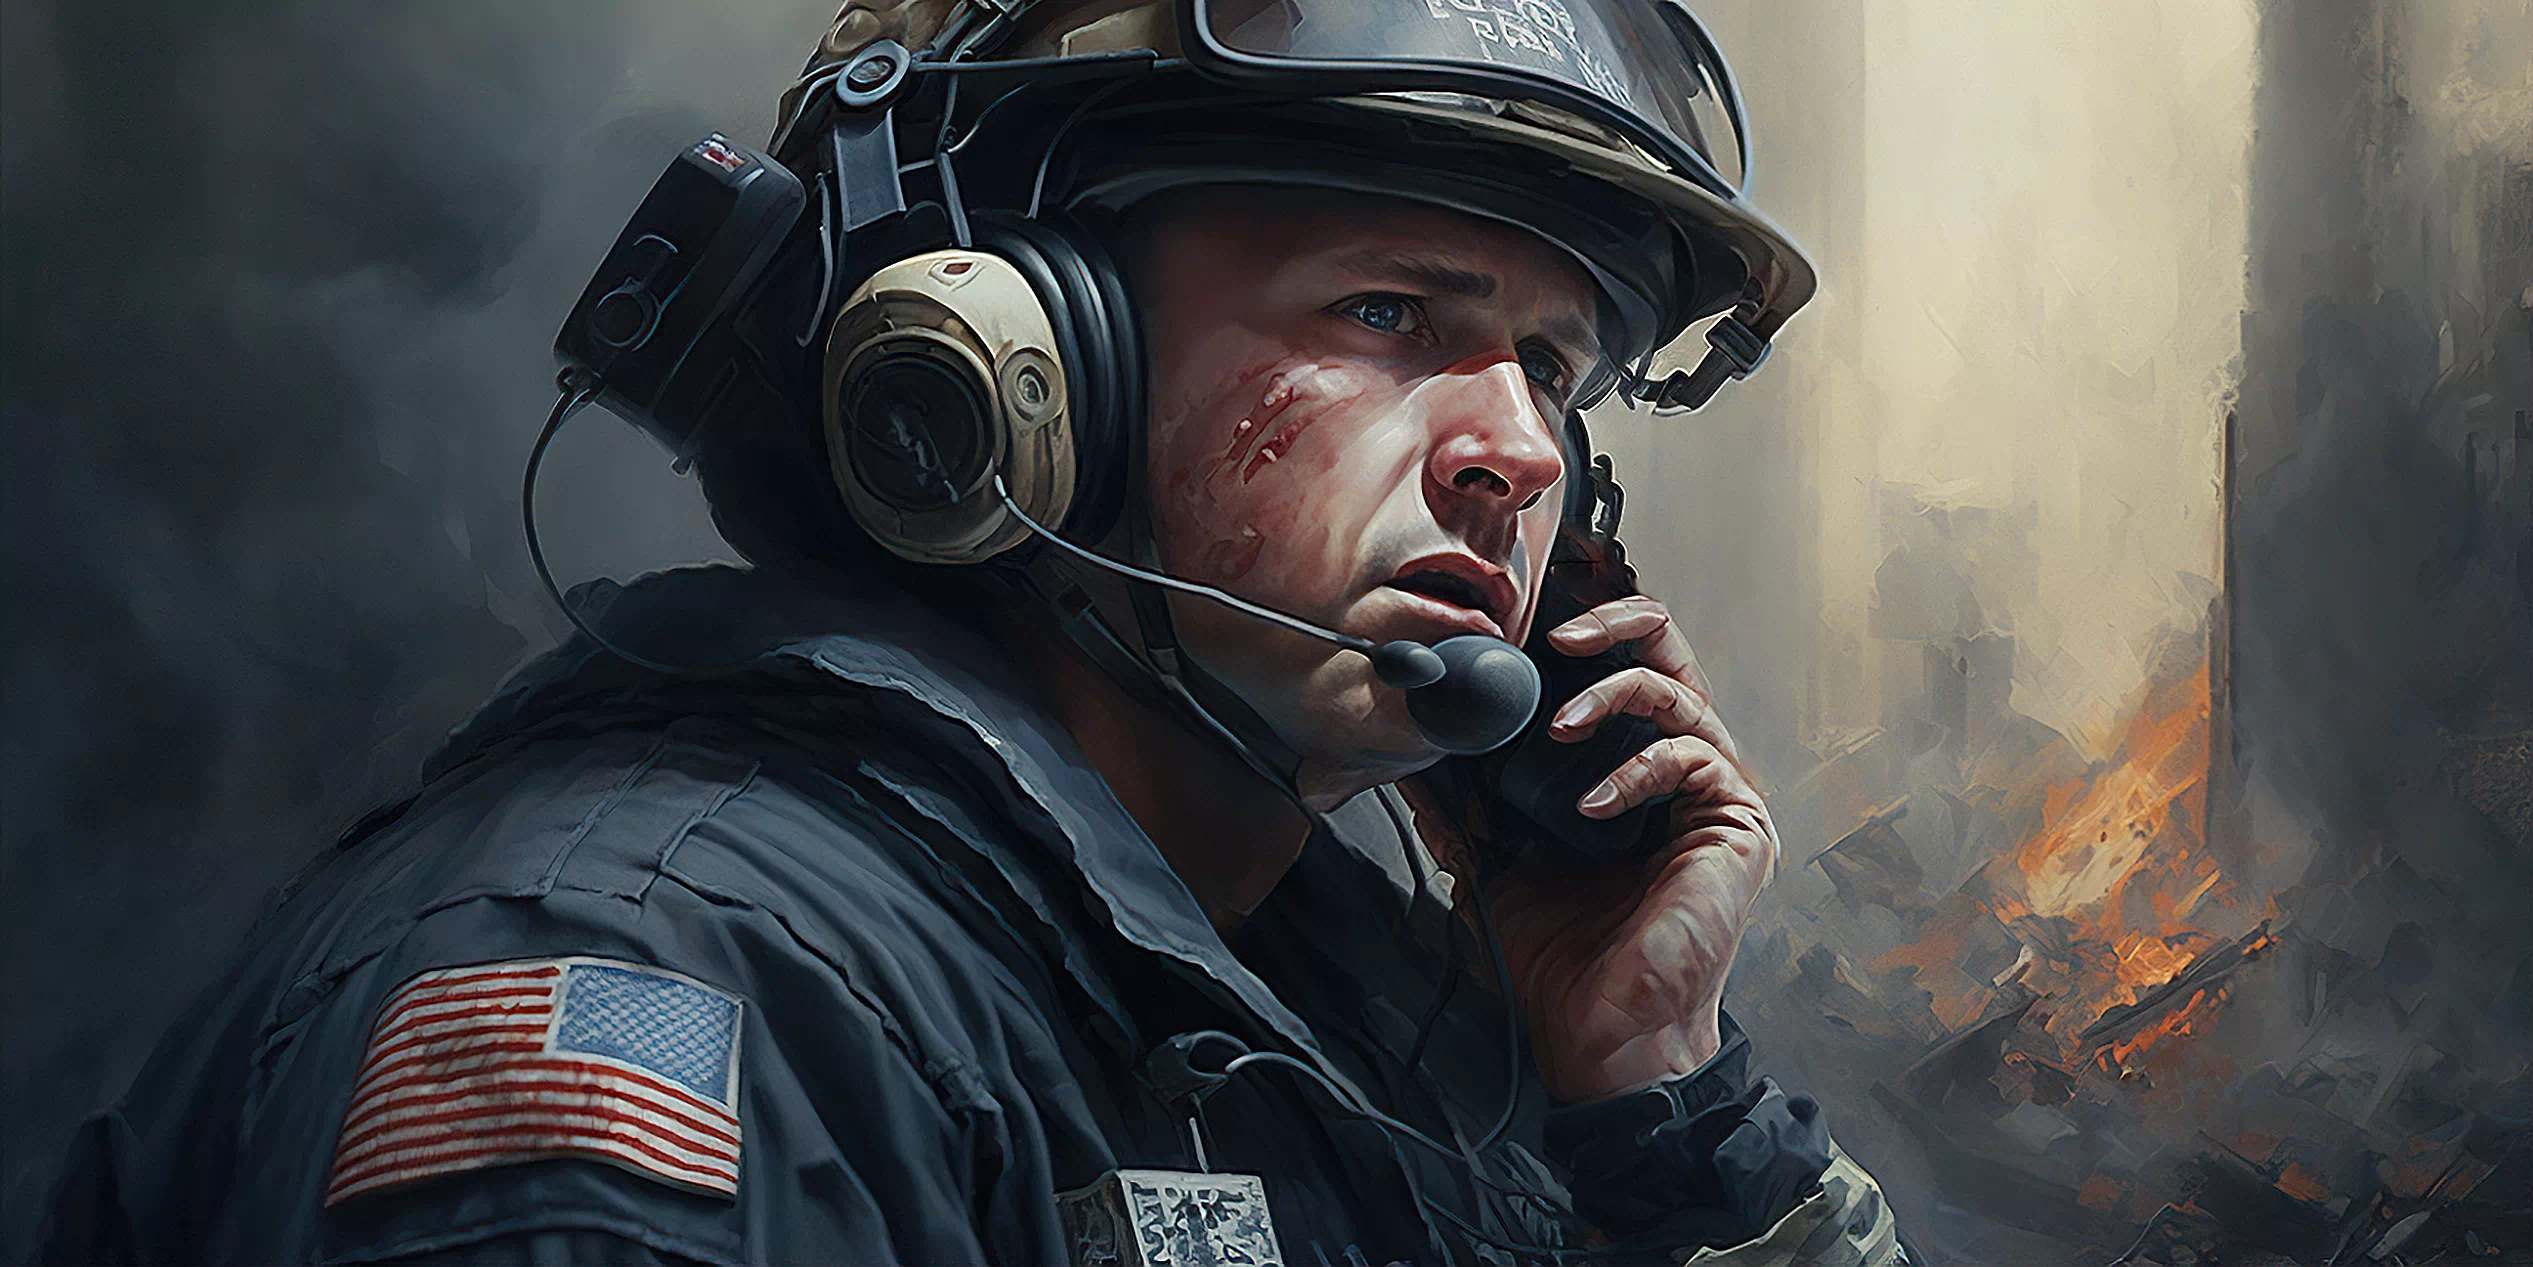 Heroes For Hope: Rising Beyond The Ashes Thriving Beyond 9/11 7